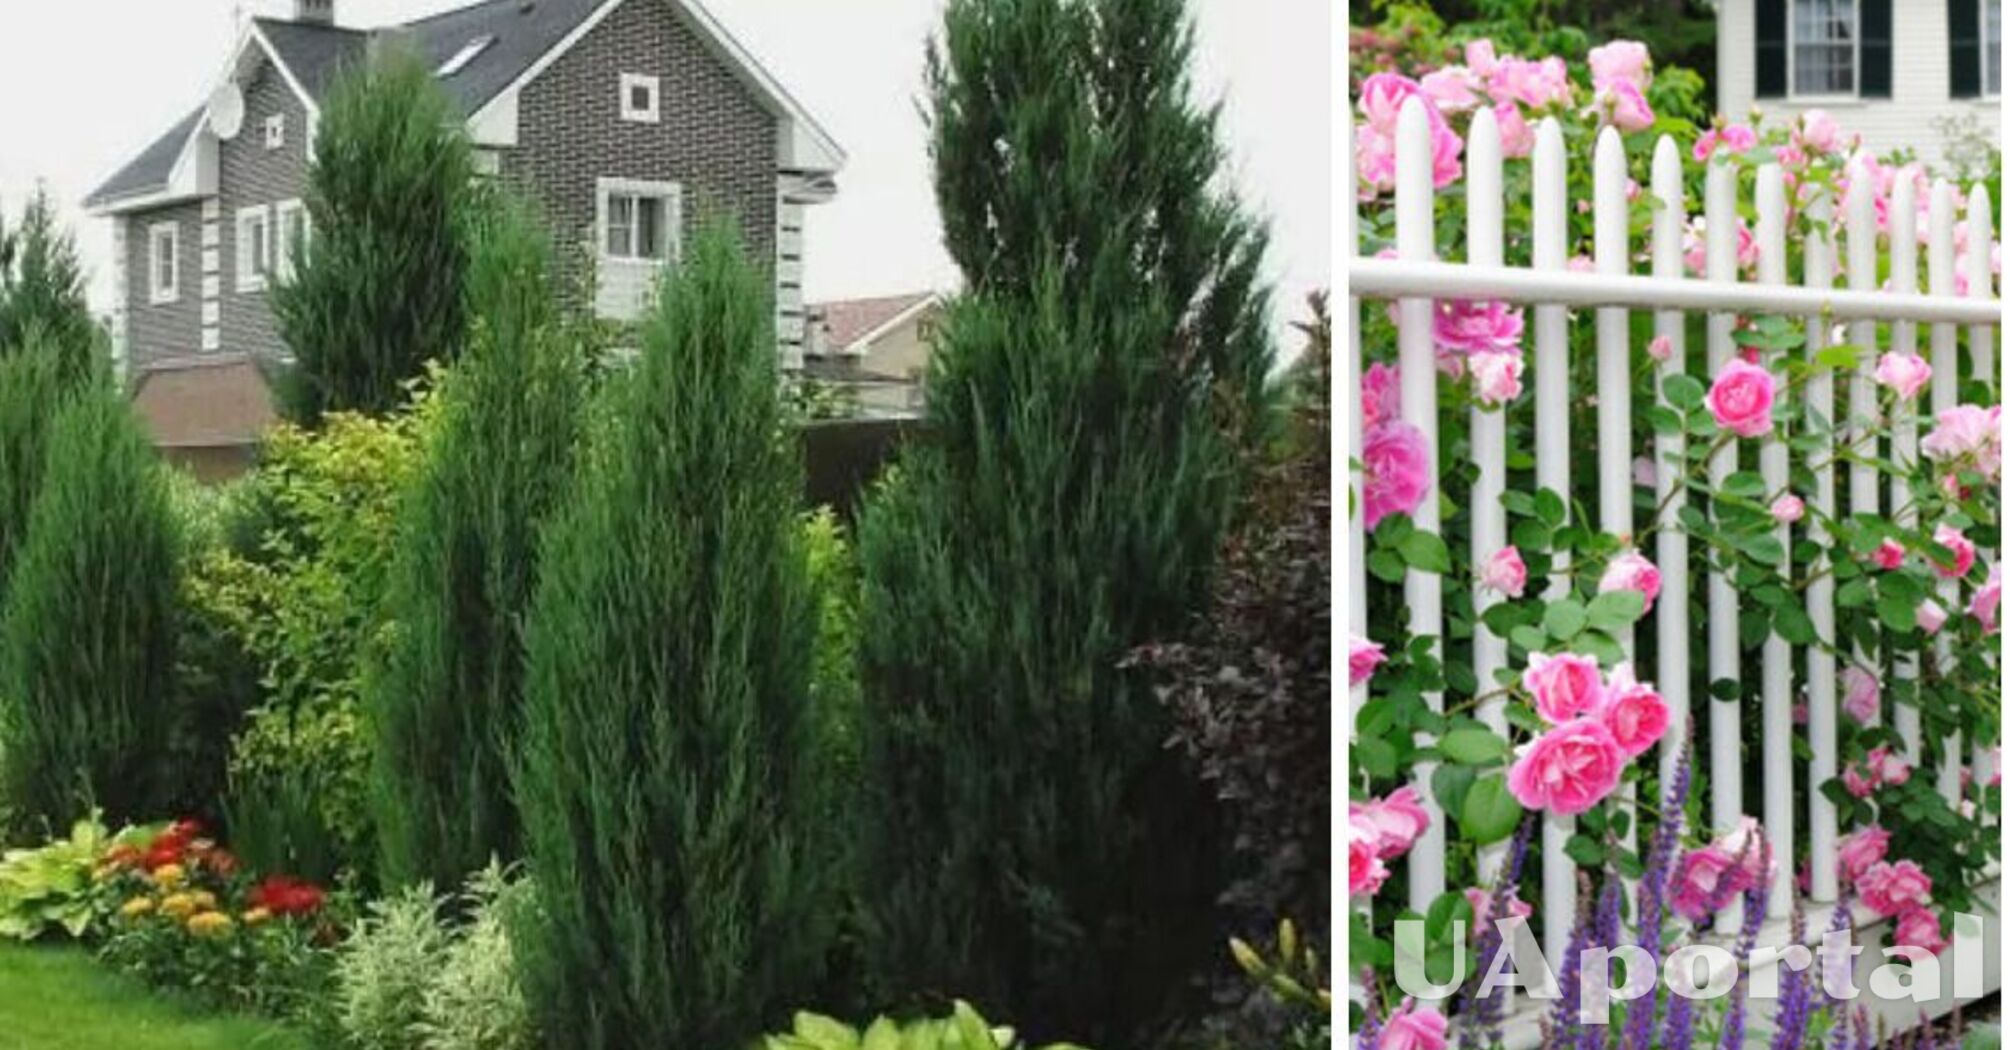 How to decorate a fence in the country with plants